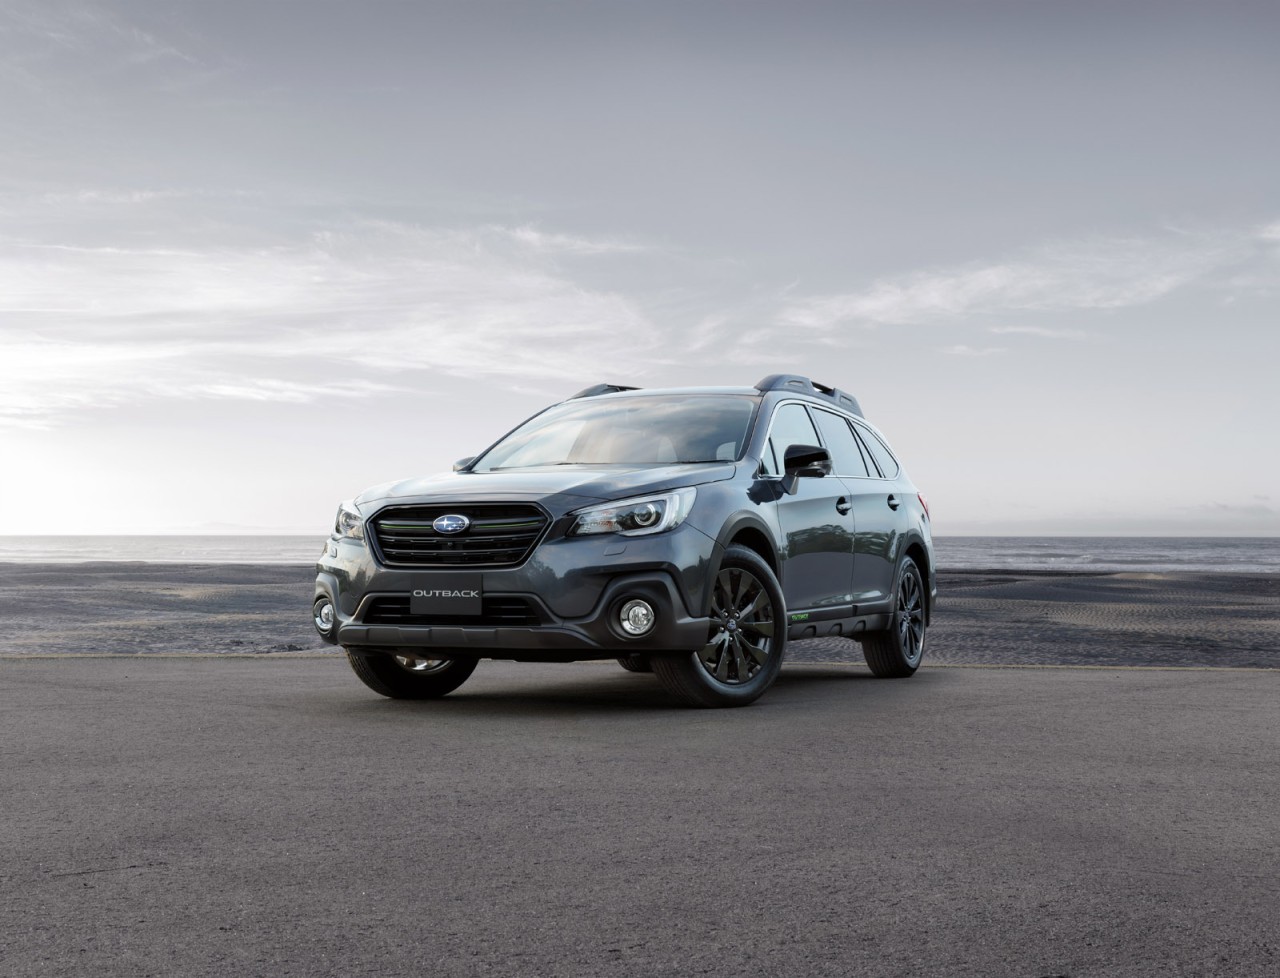 The new Subaru Outback X will be arriving to New Zealand shores next month. 